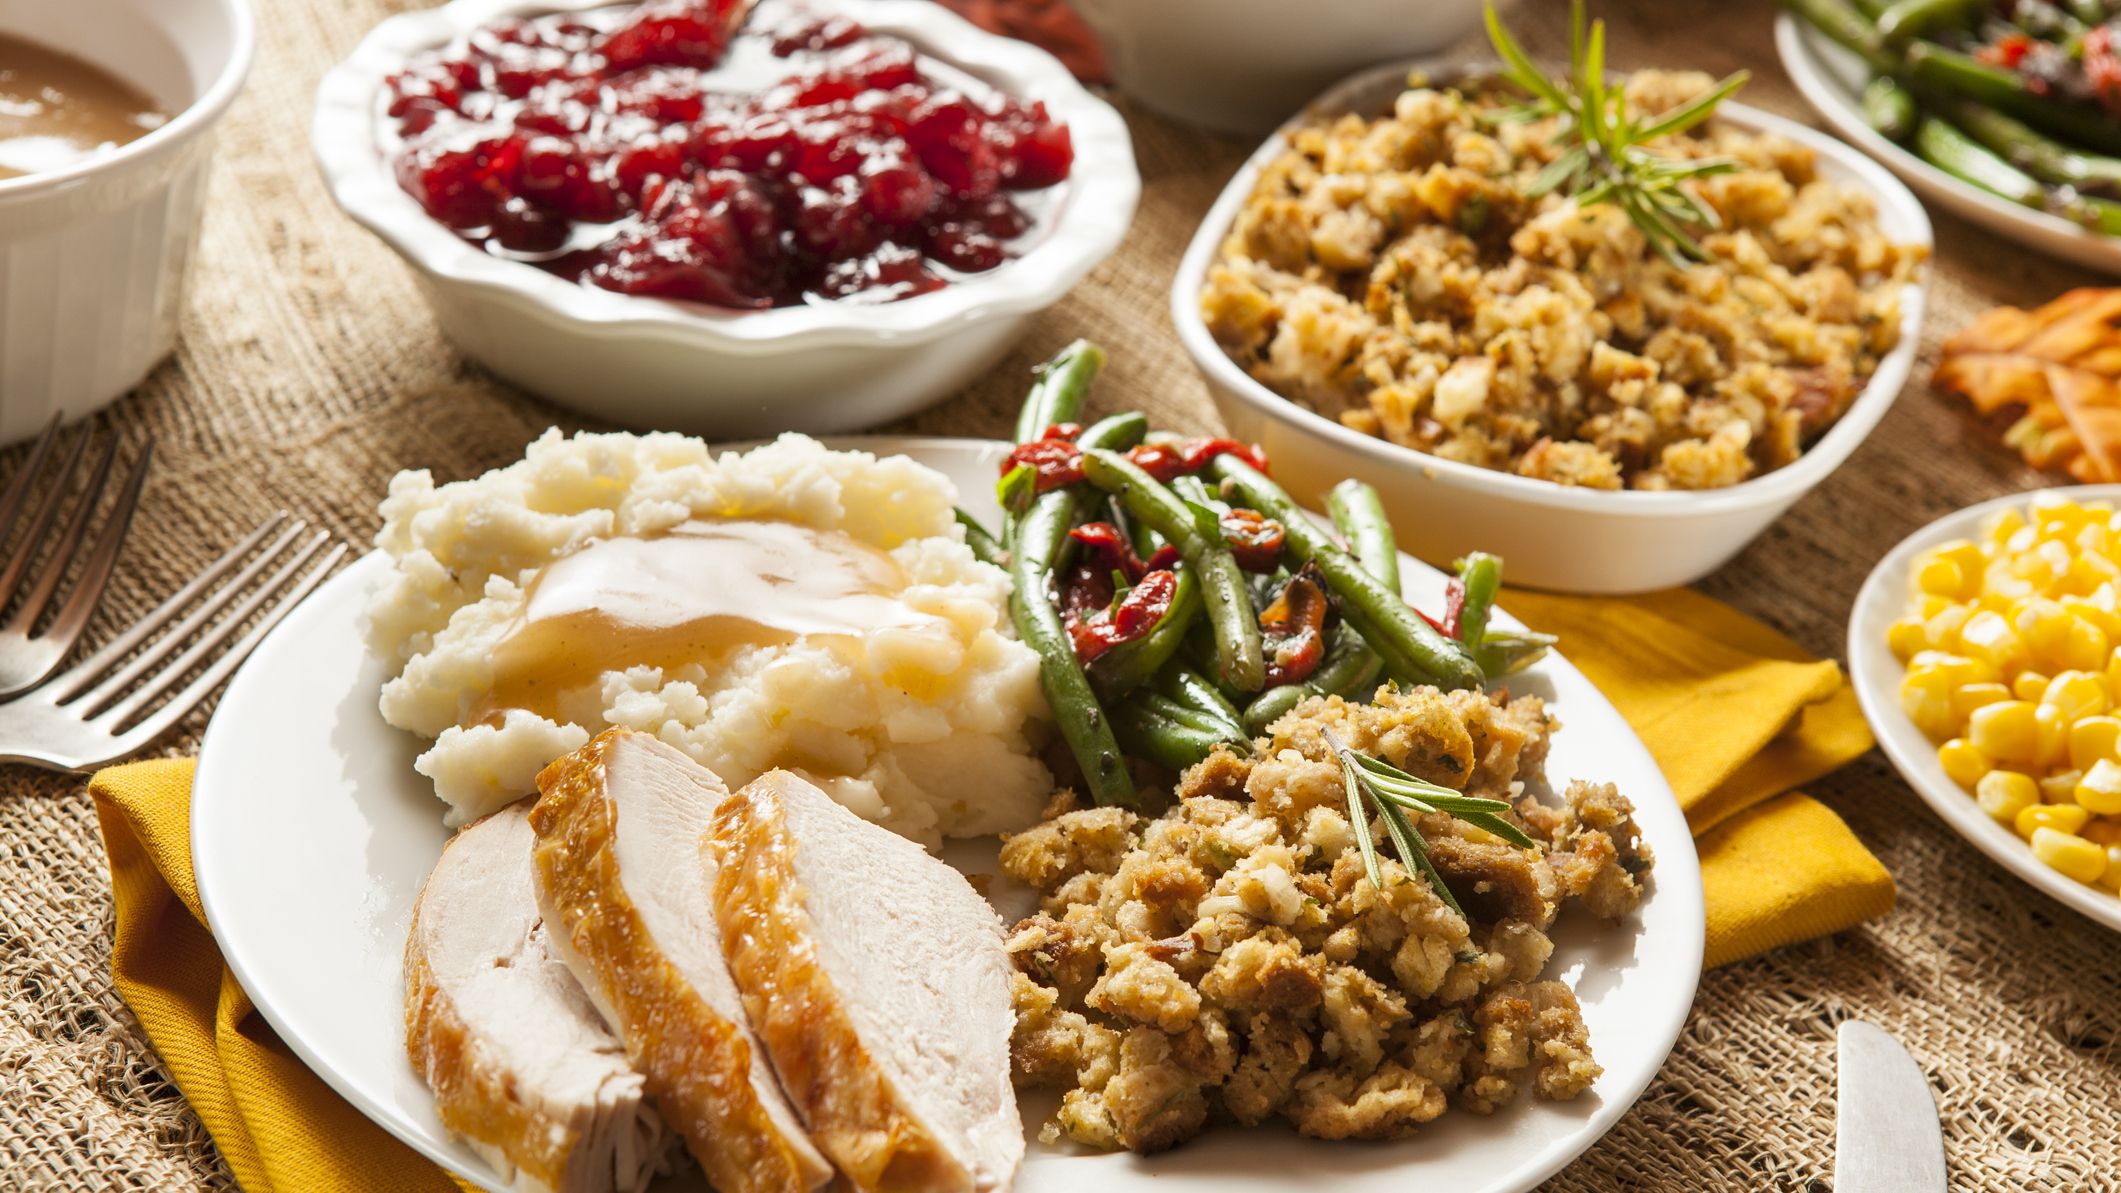 22 Best Places To Order Thanksgiving Dinner To-Go in 2022